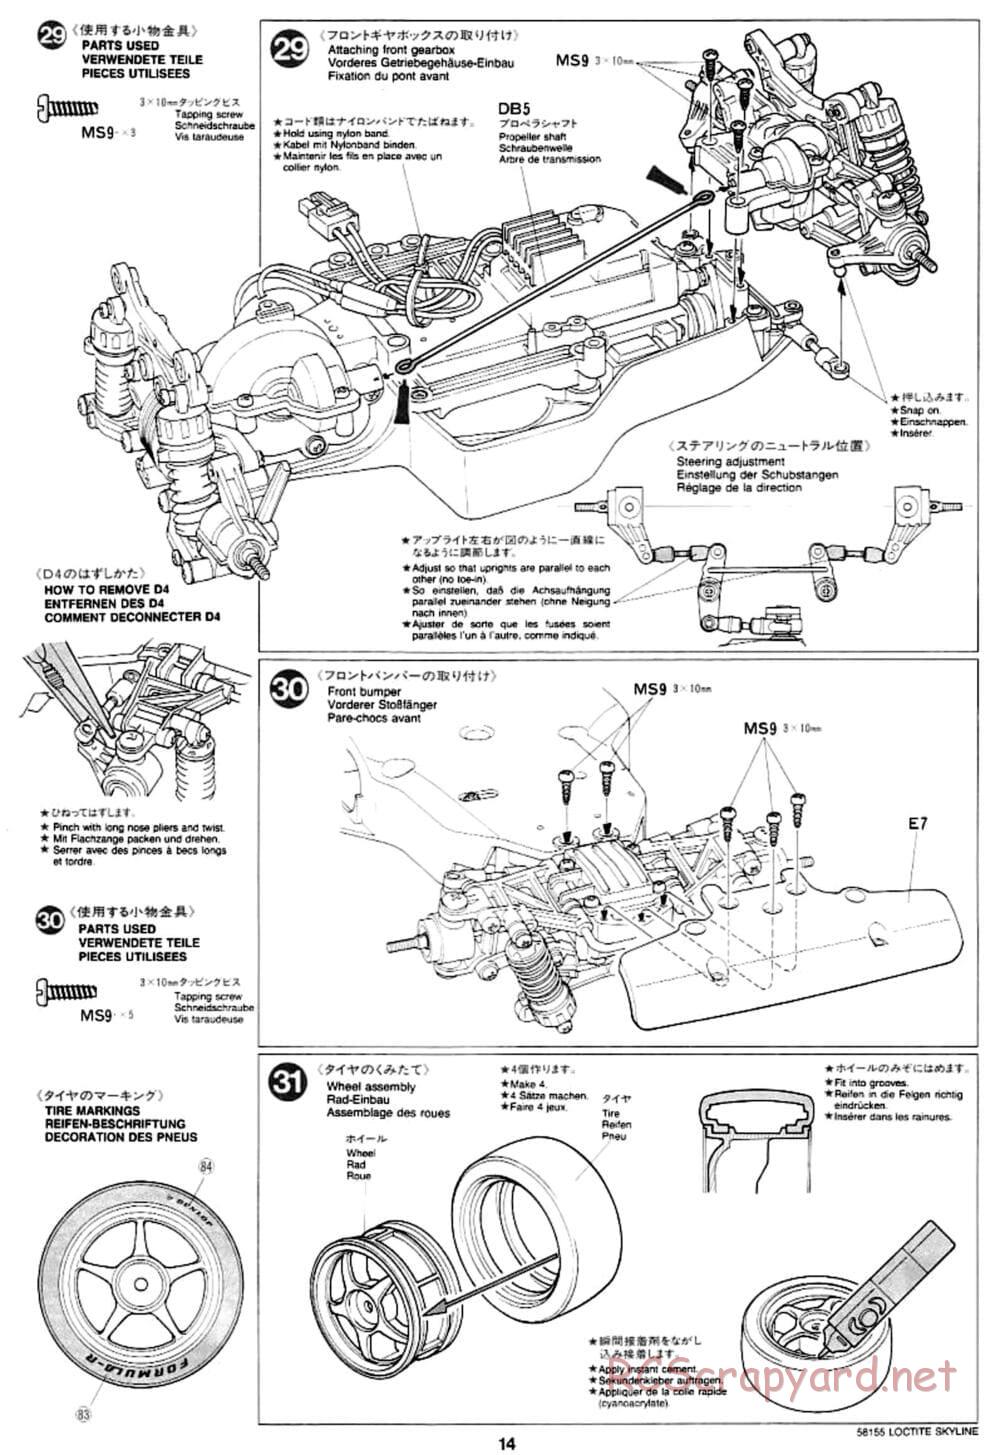 Tamiya - Loctite Nissan Skyline GT-R N1 - TA-02 Chassis - Manual - Page 14